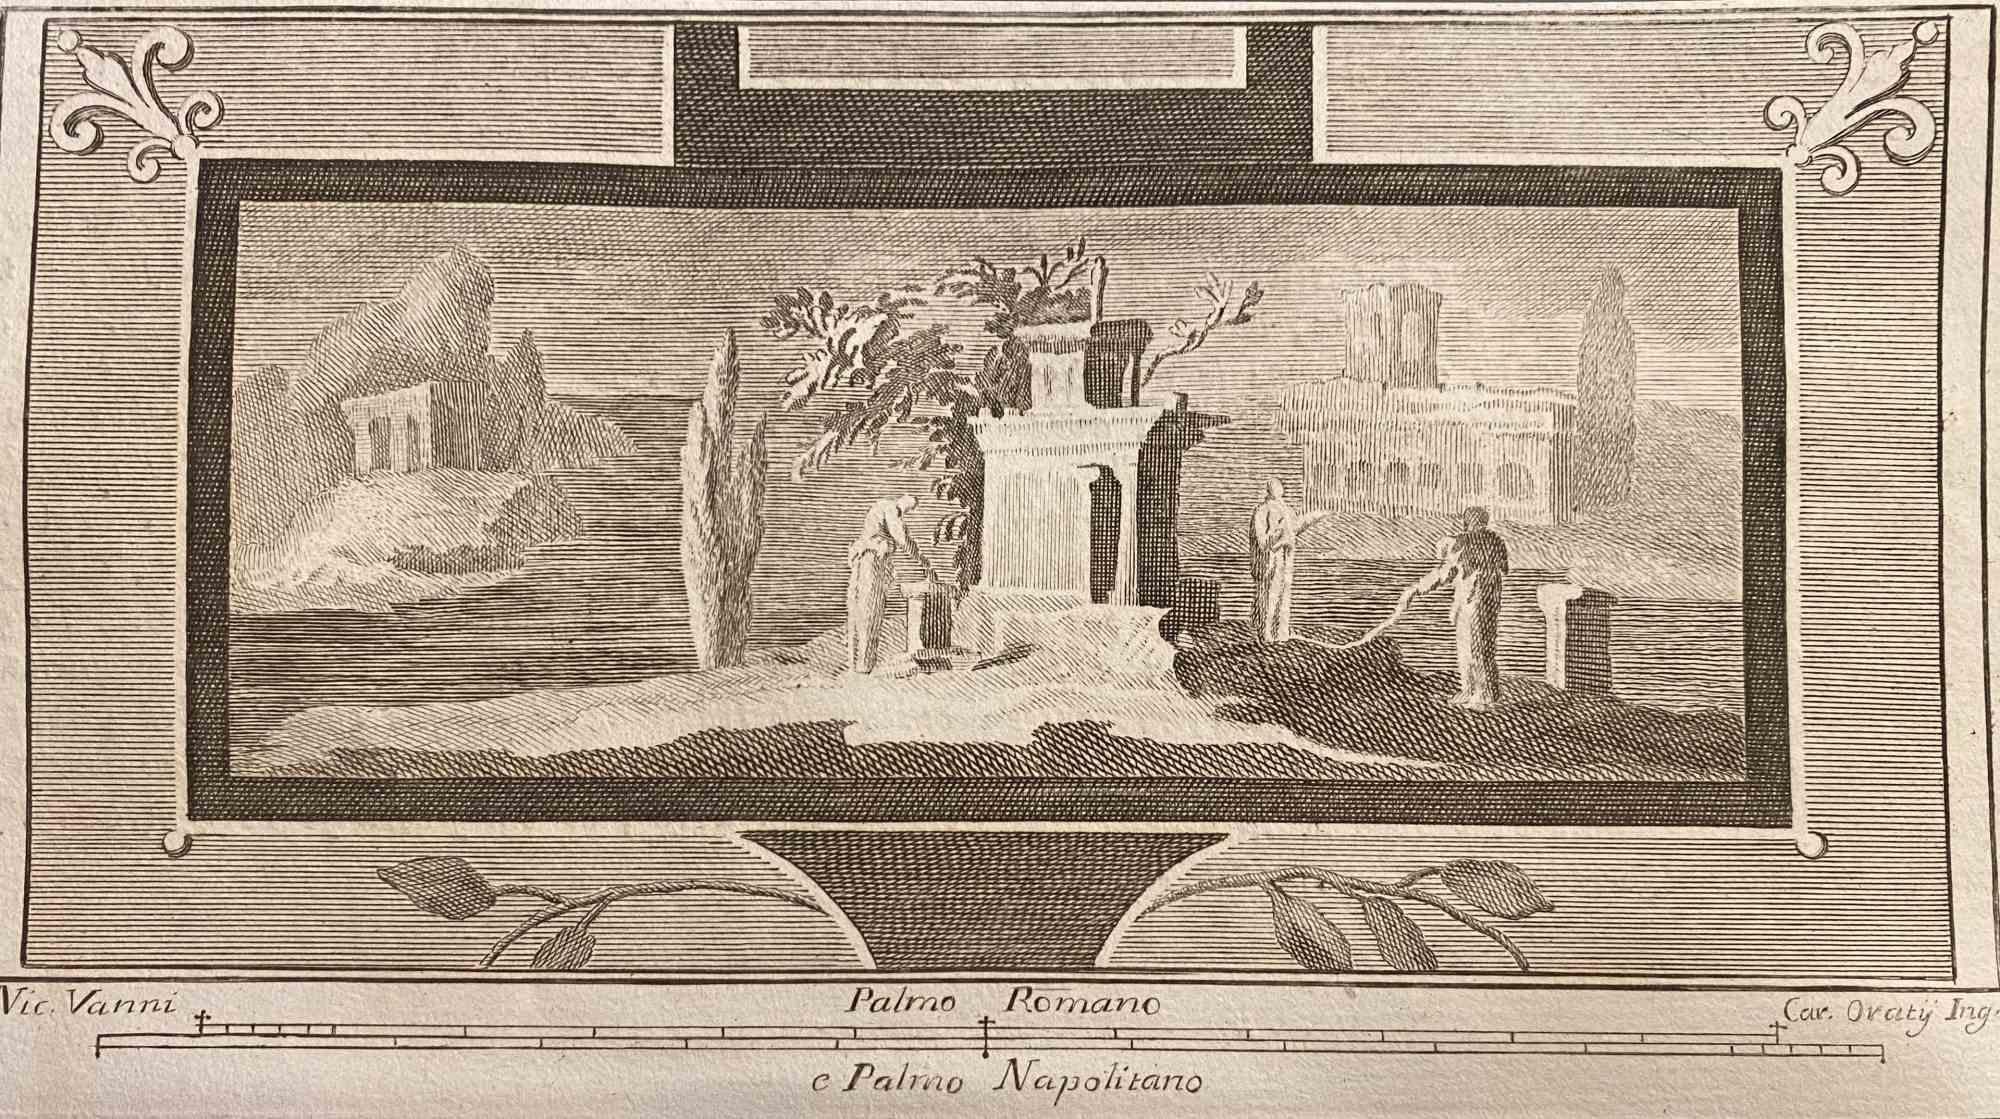 Roman Temple Fresco from "Antiquities of Herculaneum" is an etching on paper realized by Carlo Oraty in the 18th Century.

Signed on the plate.

Good conditions.

The etching belongs to the print suite “Antiquities of Herculaneum Exposed” (original